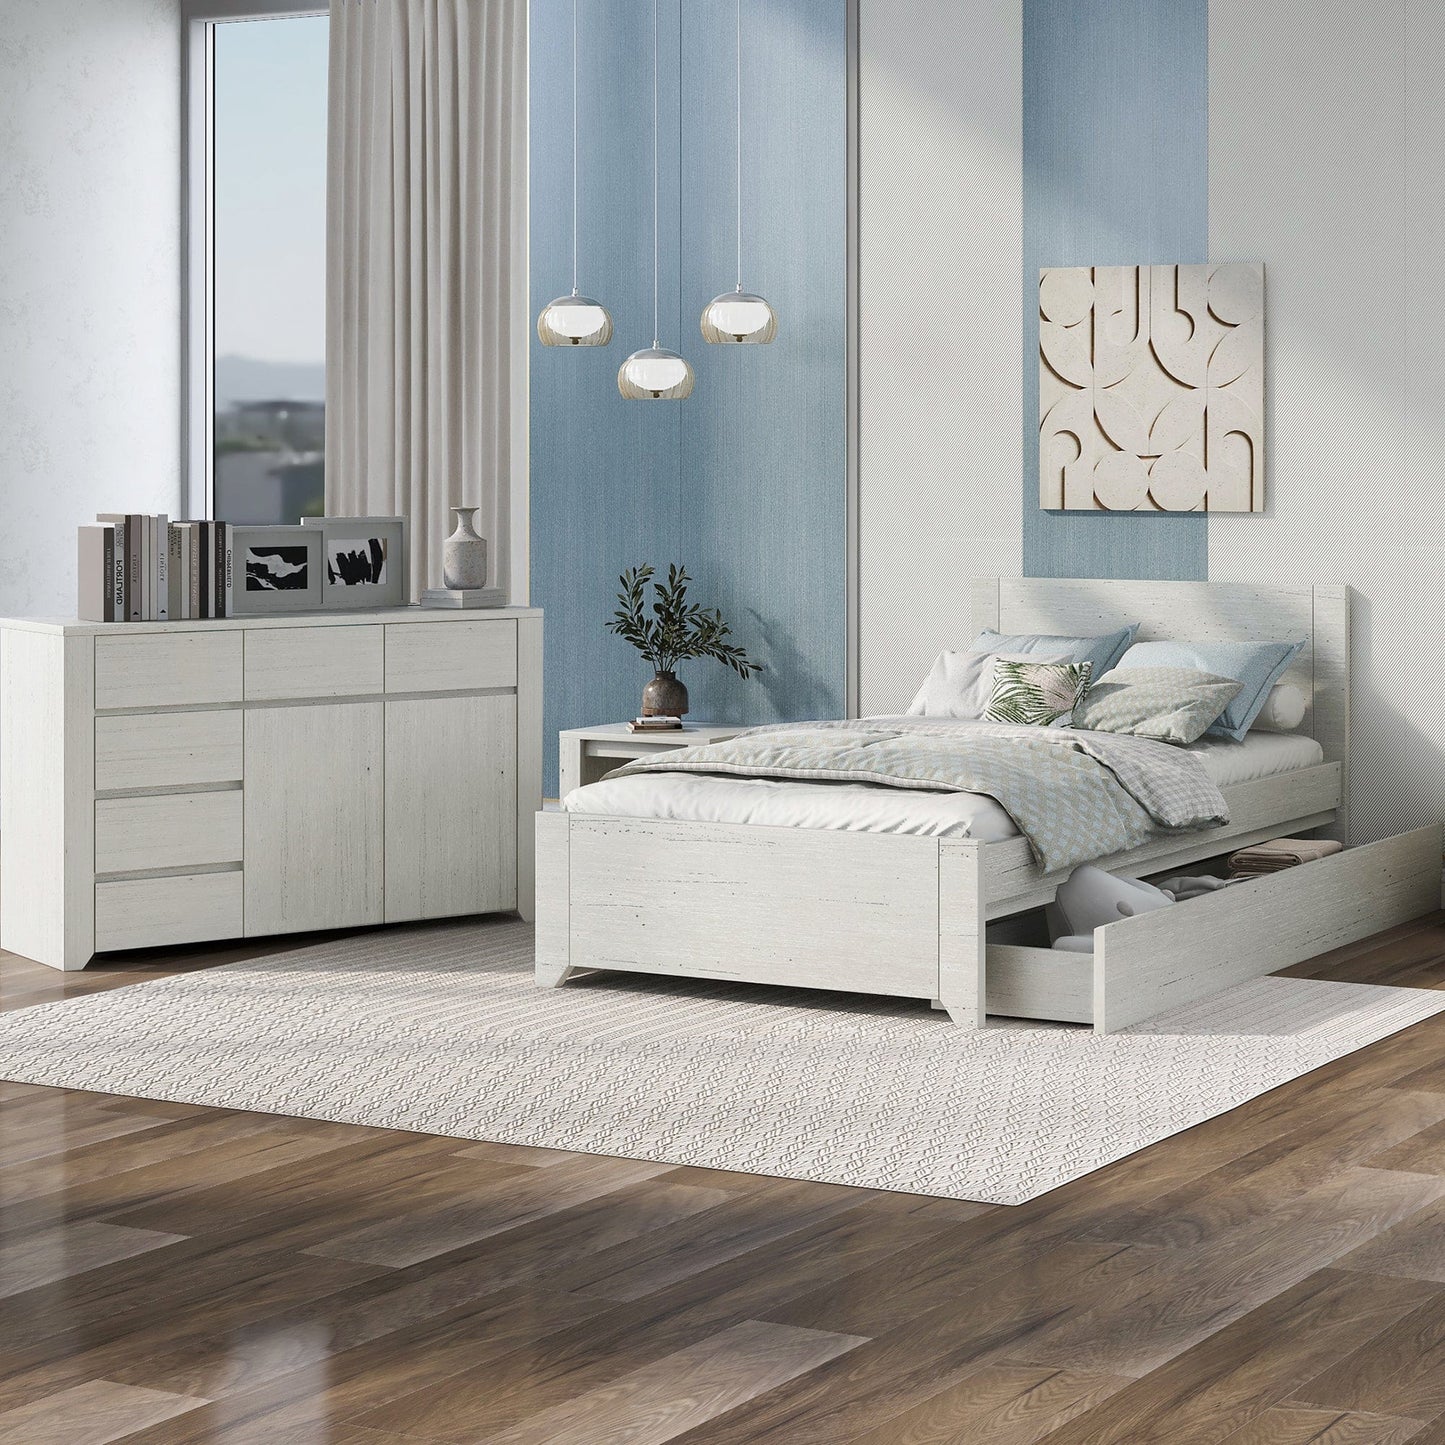 3 Pieces Cream Simple Style Manufacture Wood Bedroom Sets with Twin bed, Nightstand and Dresser